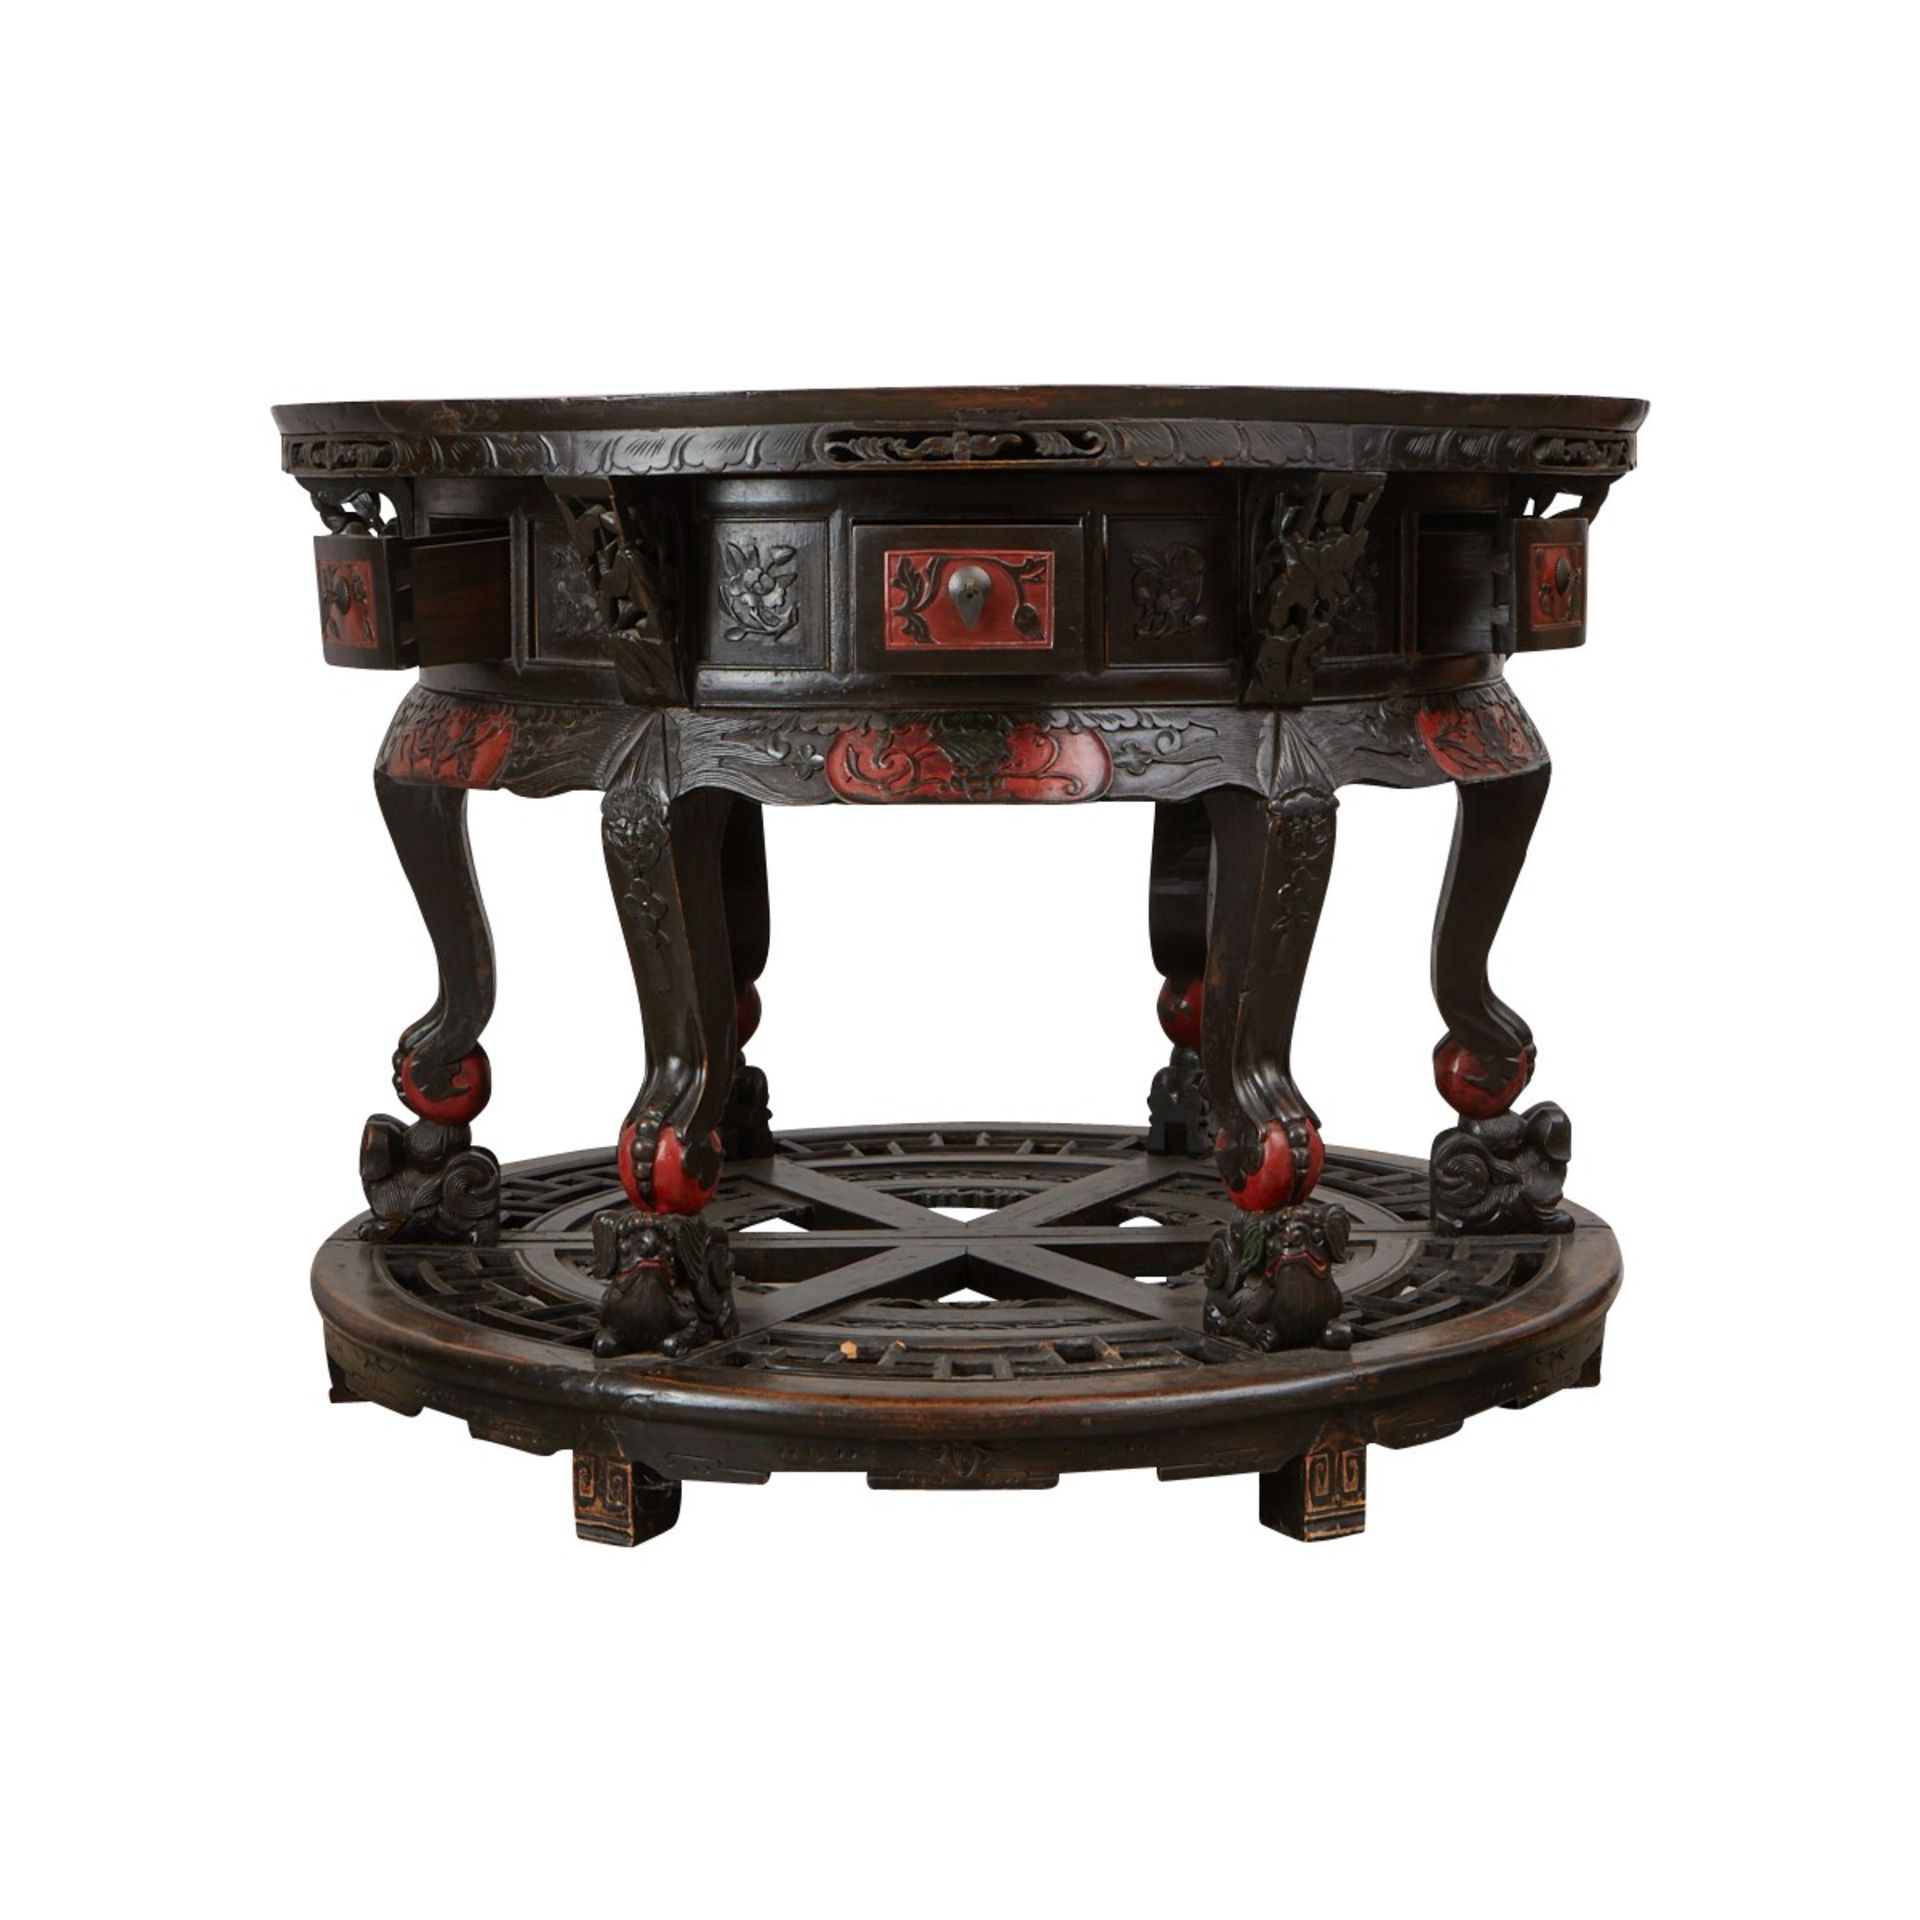 Chinese Round Carved Wood Table w/ Drawers 19th c. - Image 2 of 11